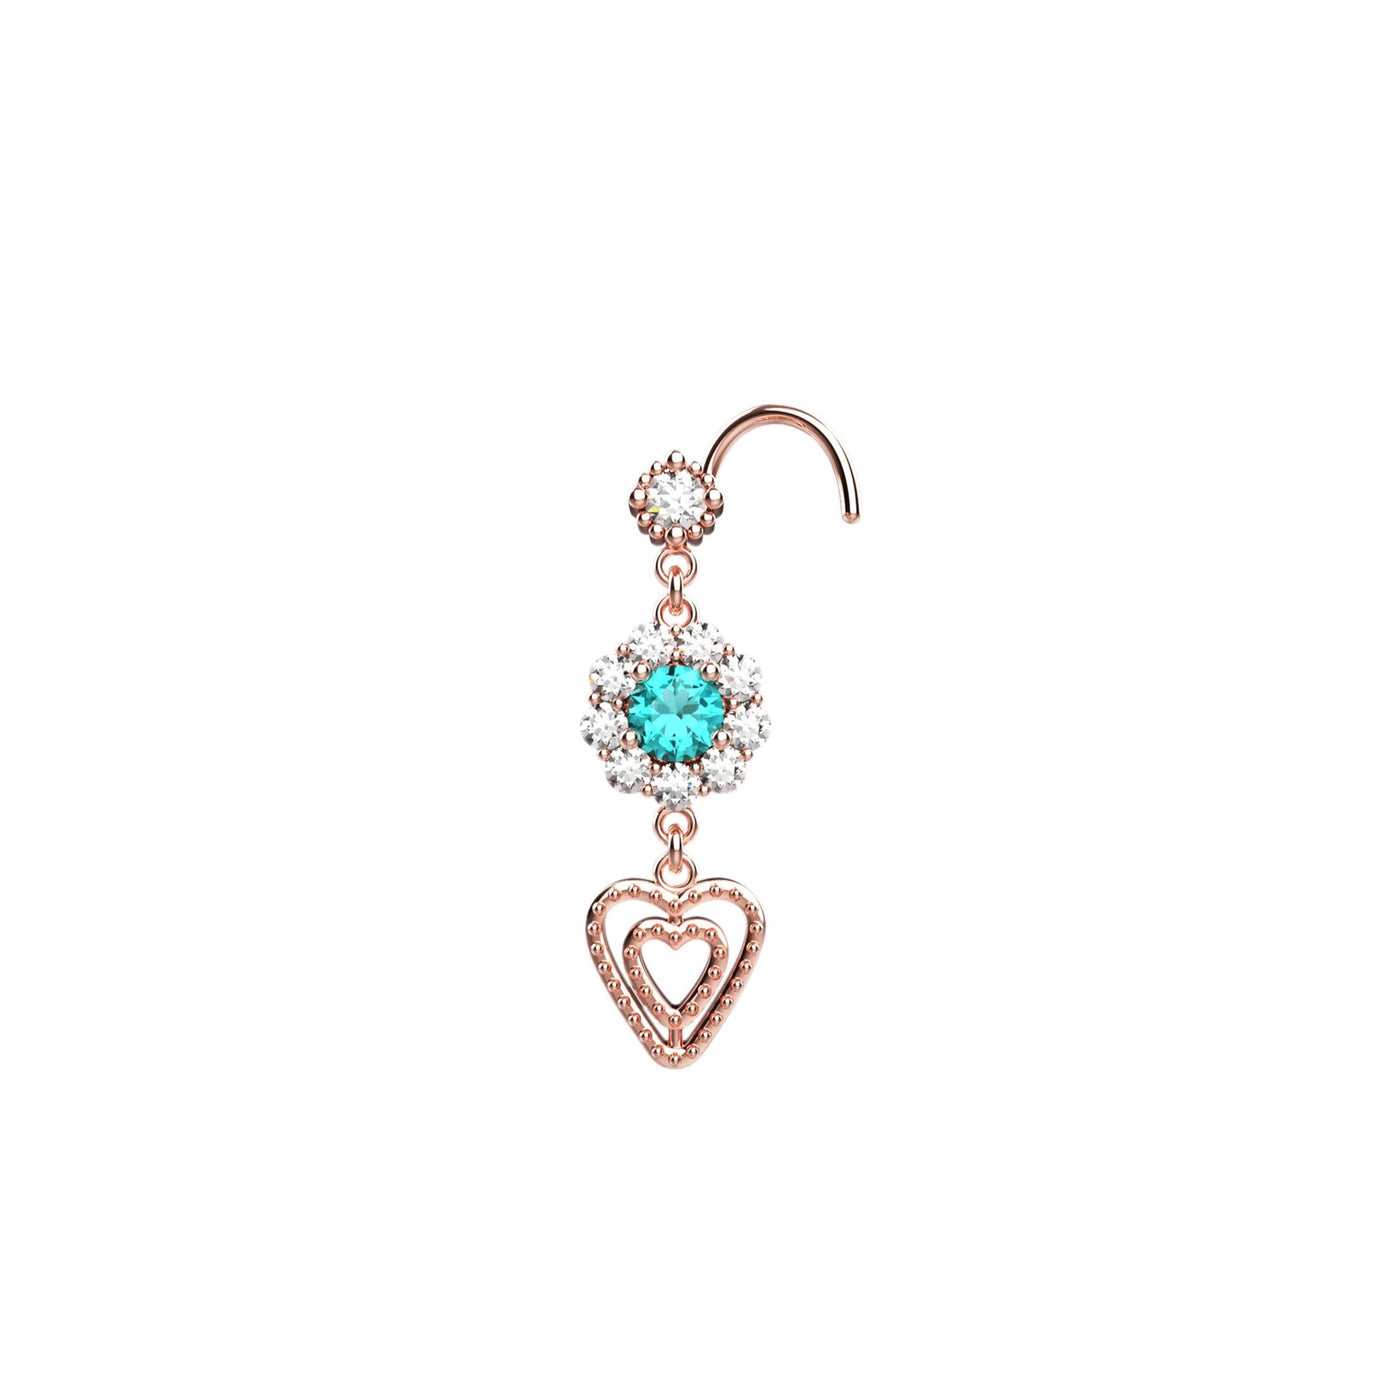 Marigold Floral Style Dangling Heart Gold Nose Stud